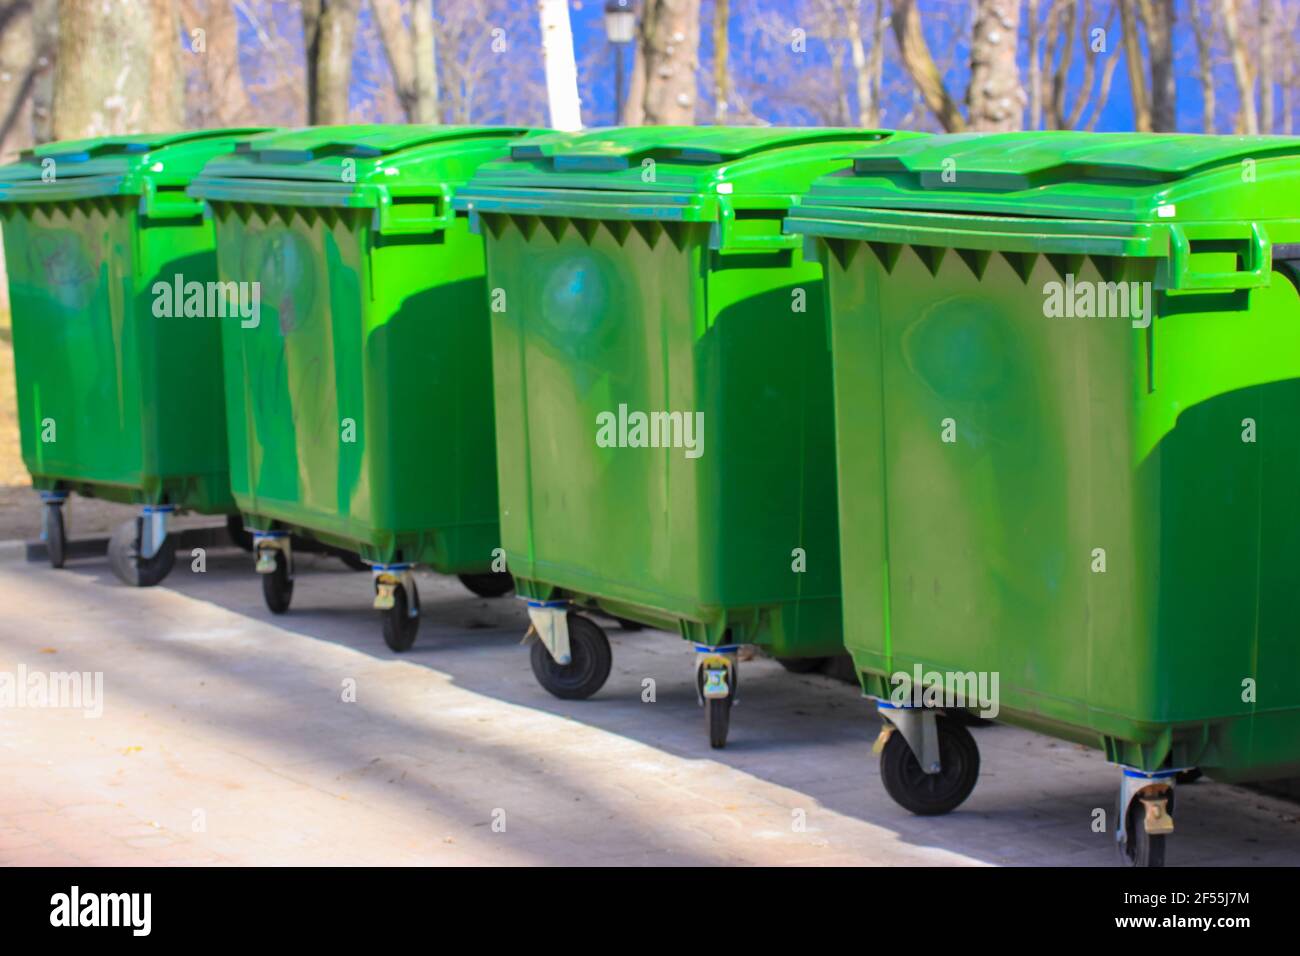 https://c8.alamy.com/comp/2F55J7M/large-green-plastic-trash-cans-on-city-street-containers-on-wheels-with-a-handle-to-collect-commercial-and-resident-trash-disposal-of-household-and-2F55J7M.jpg